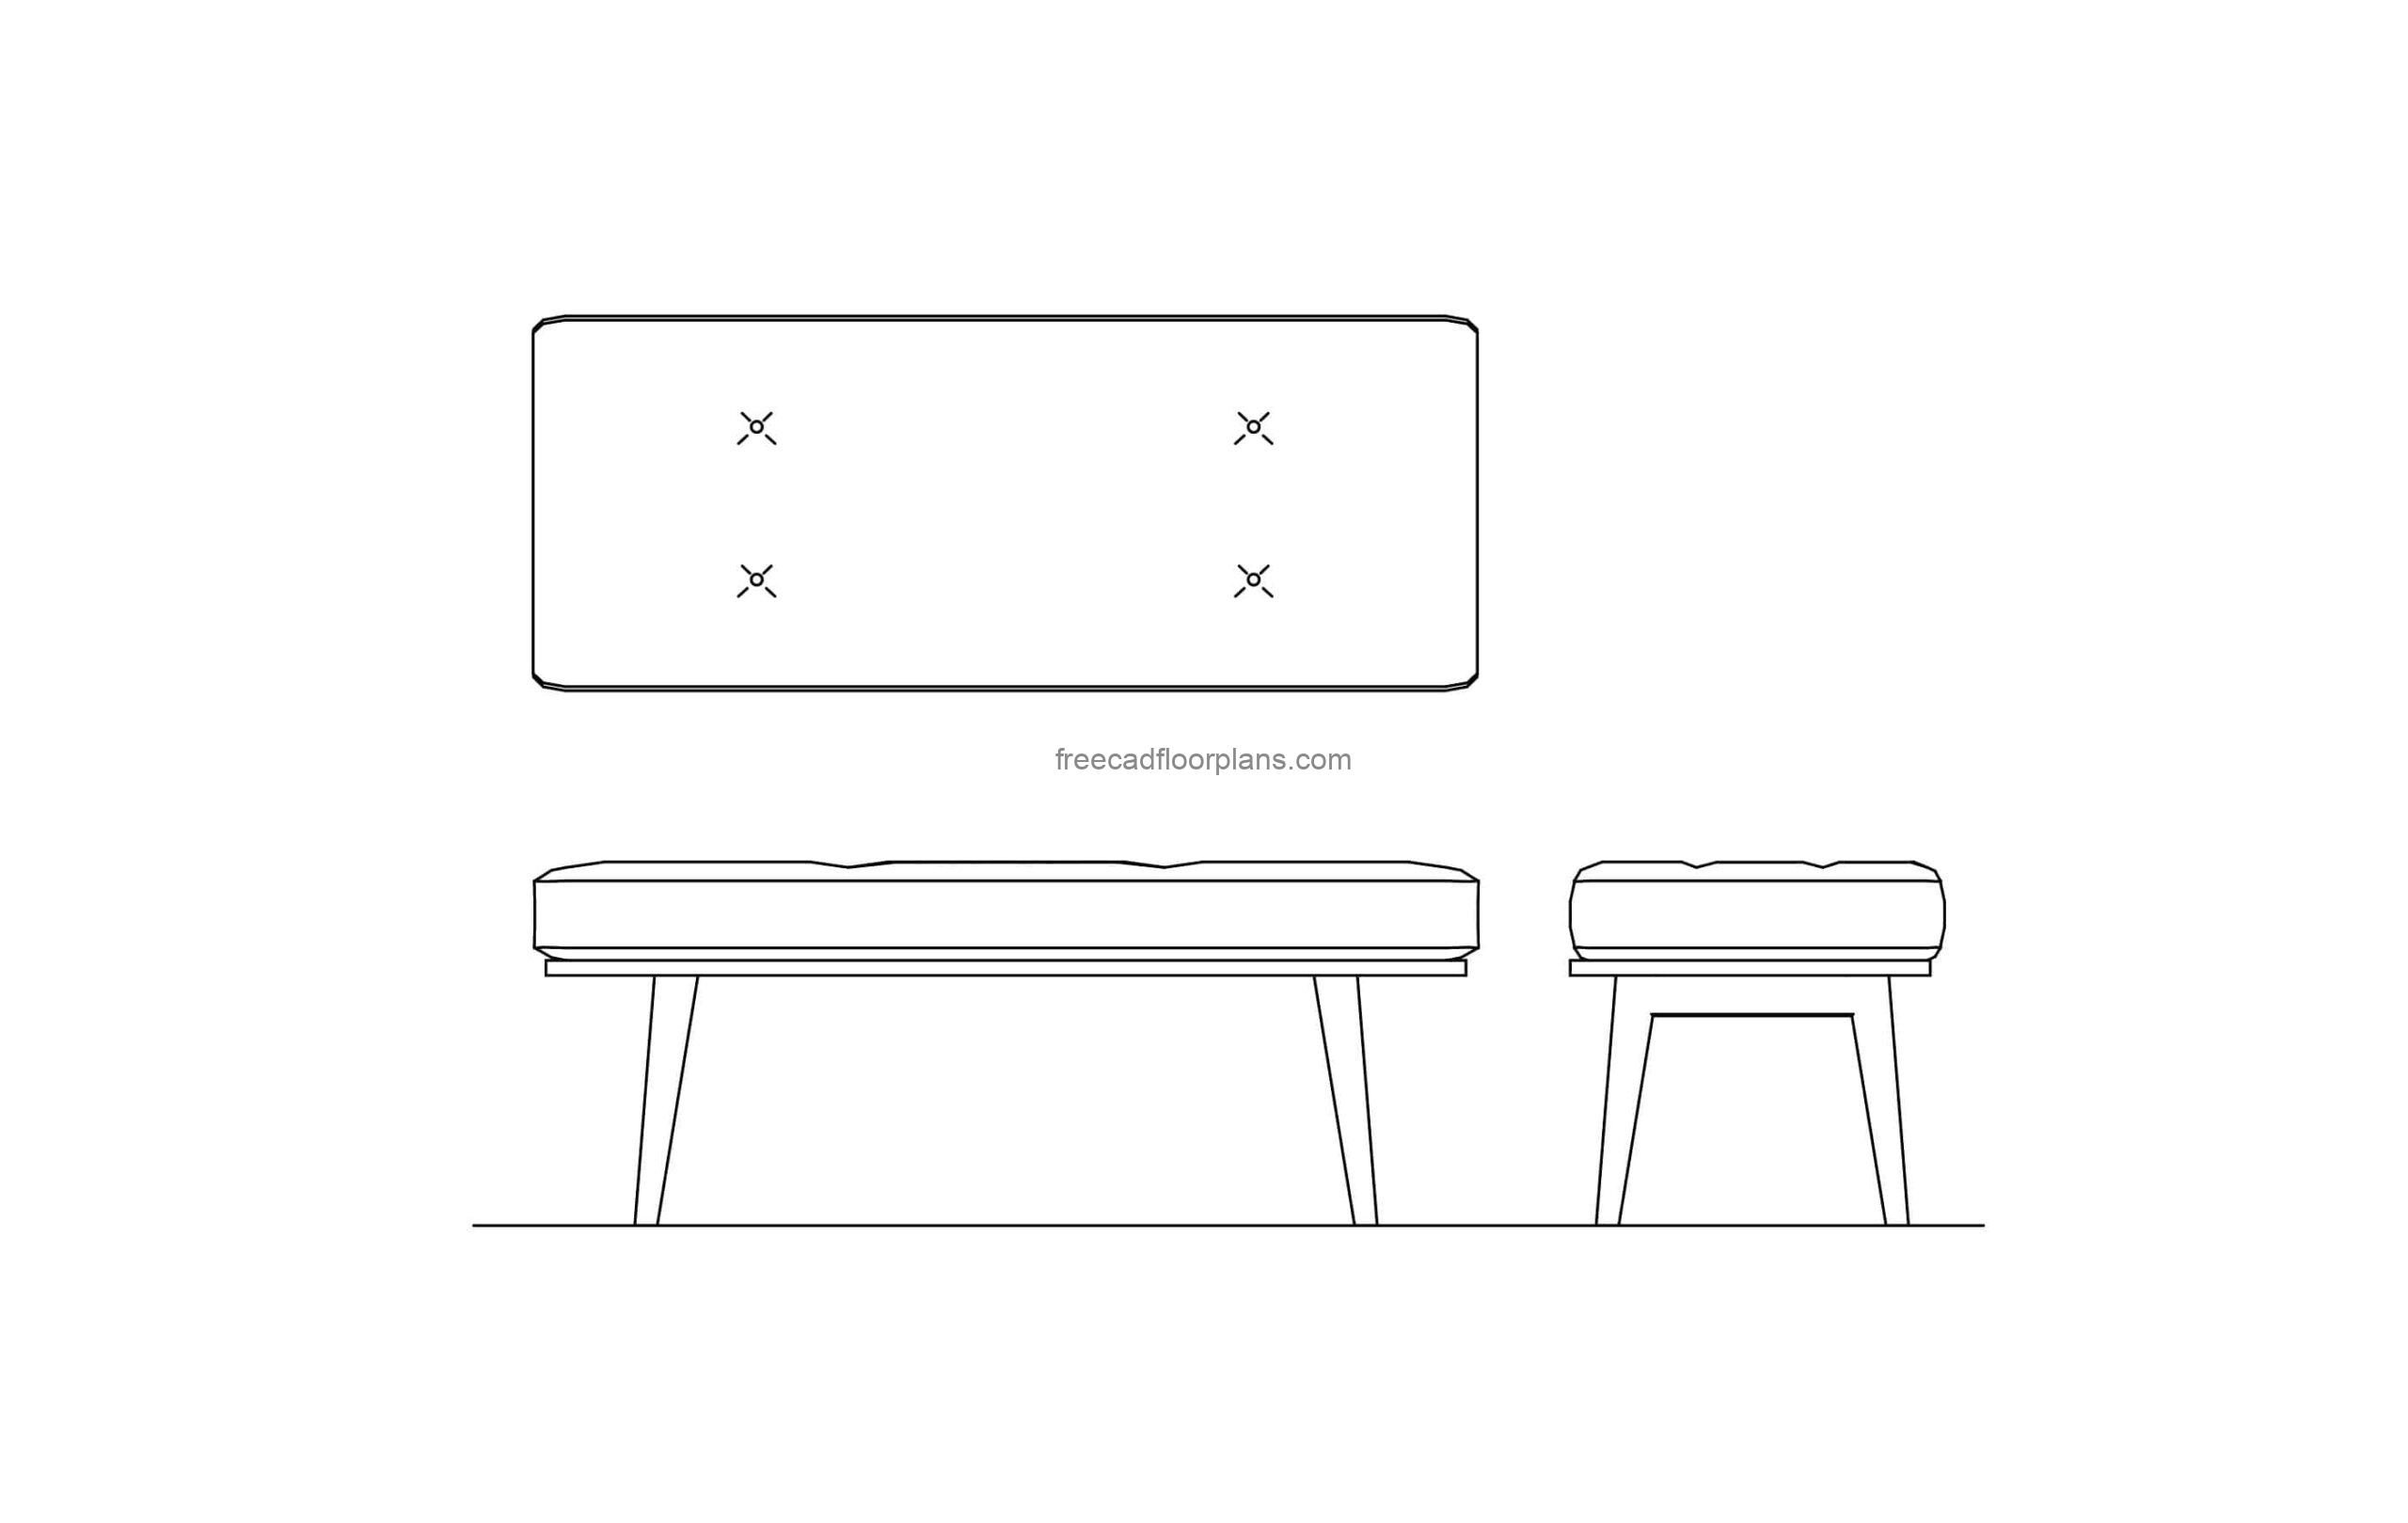 Upholstered Bedroom Bench cad block drawing all 2d views free file for download